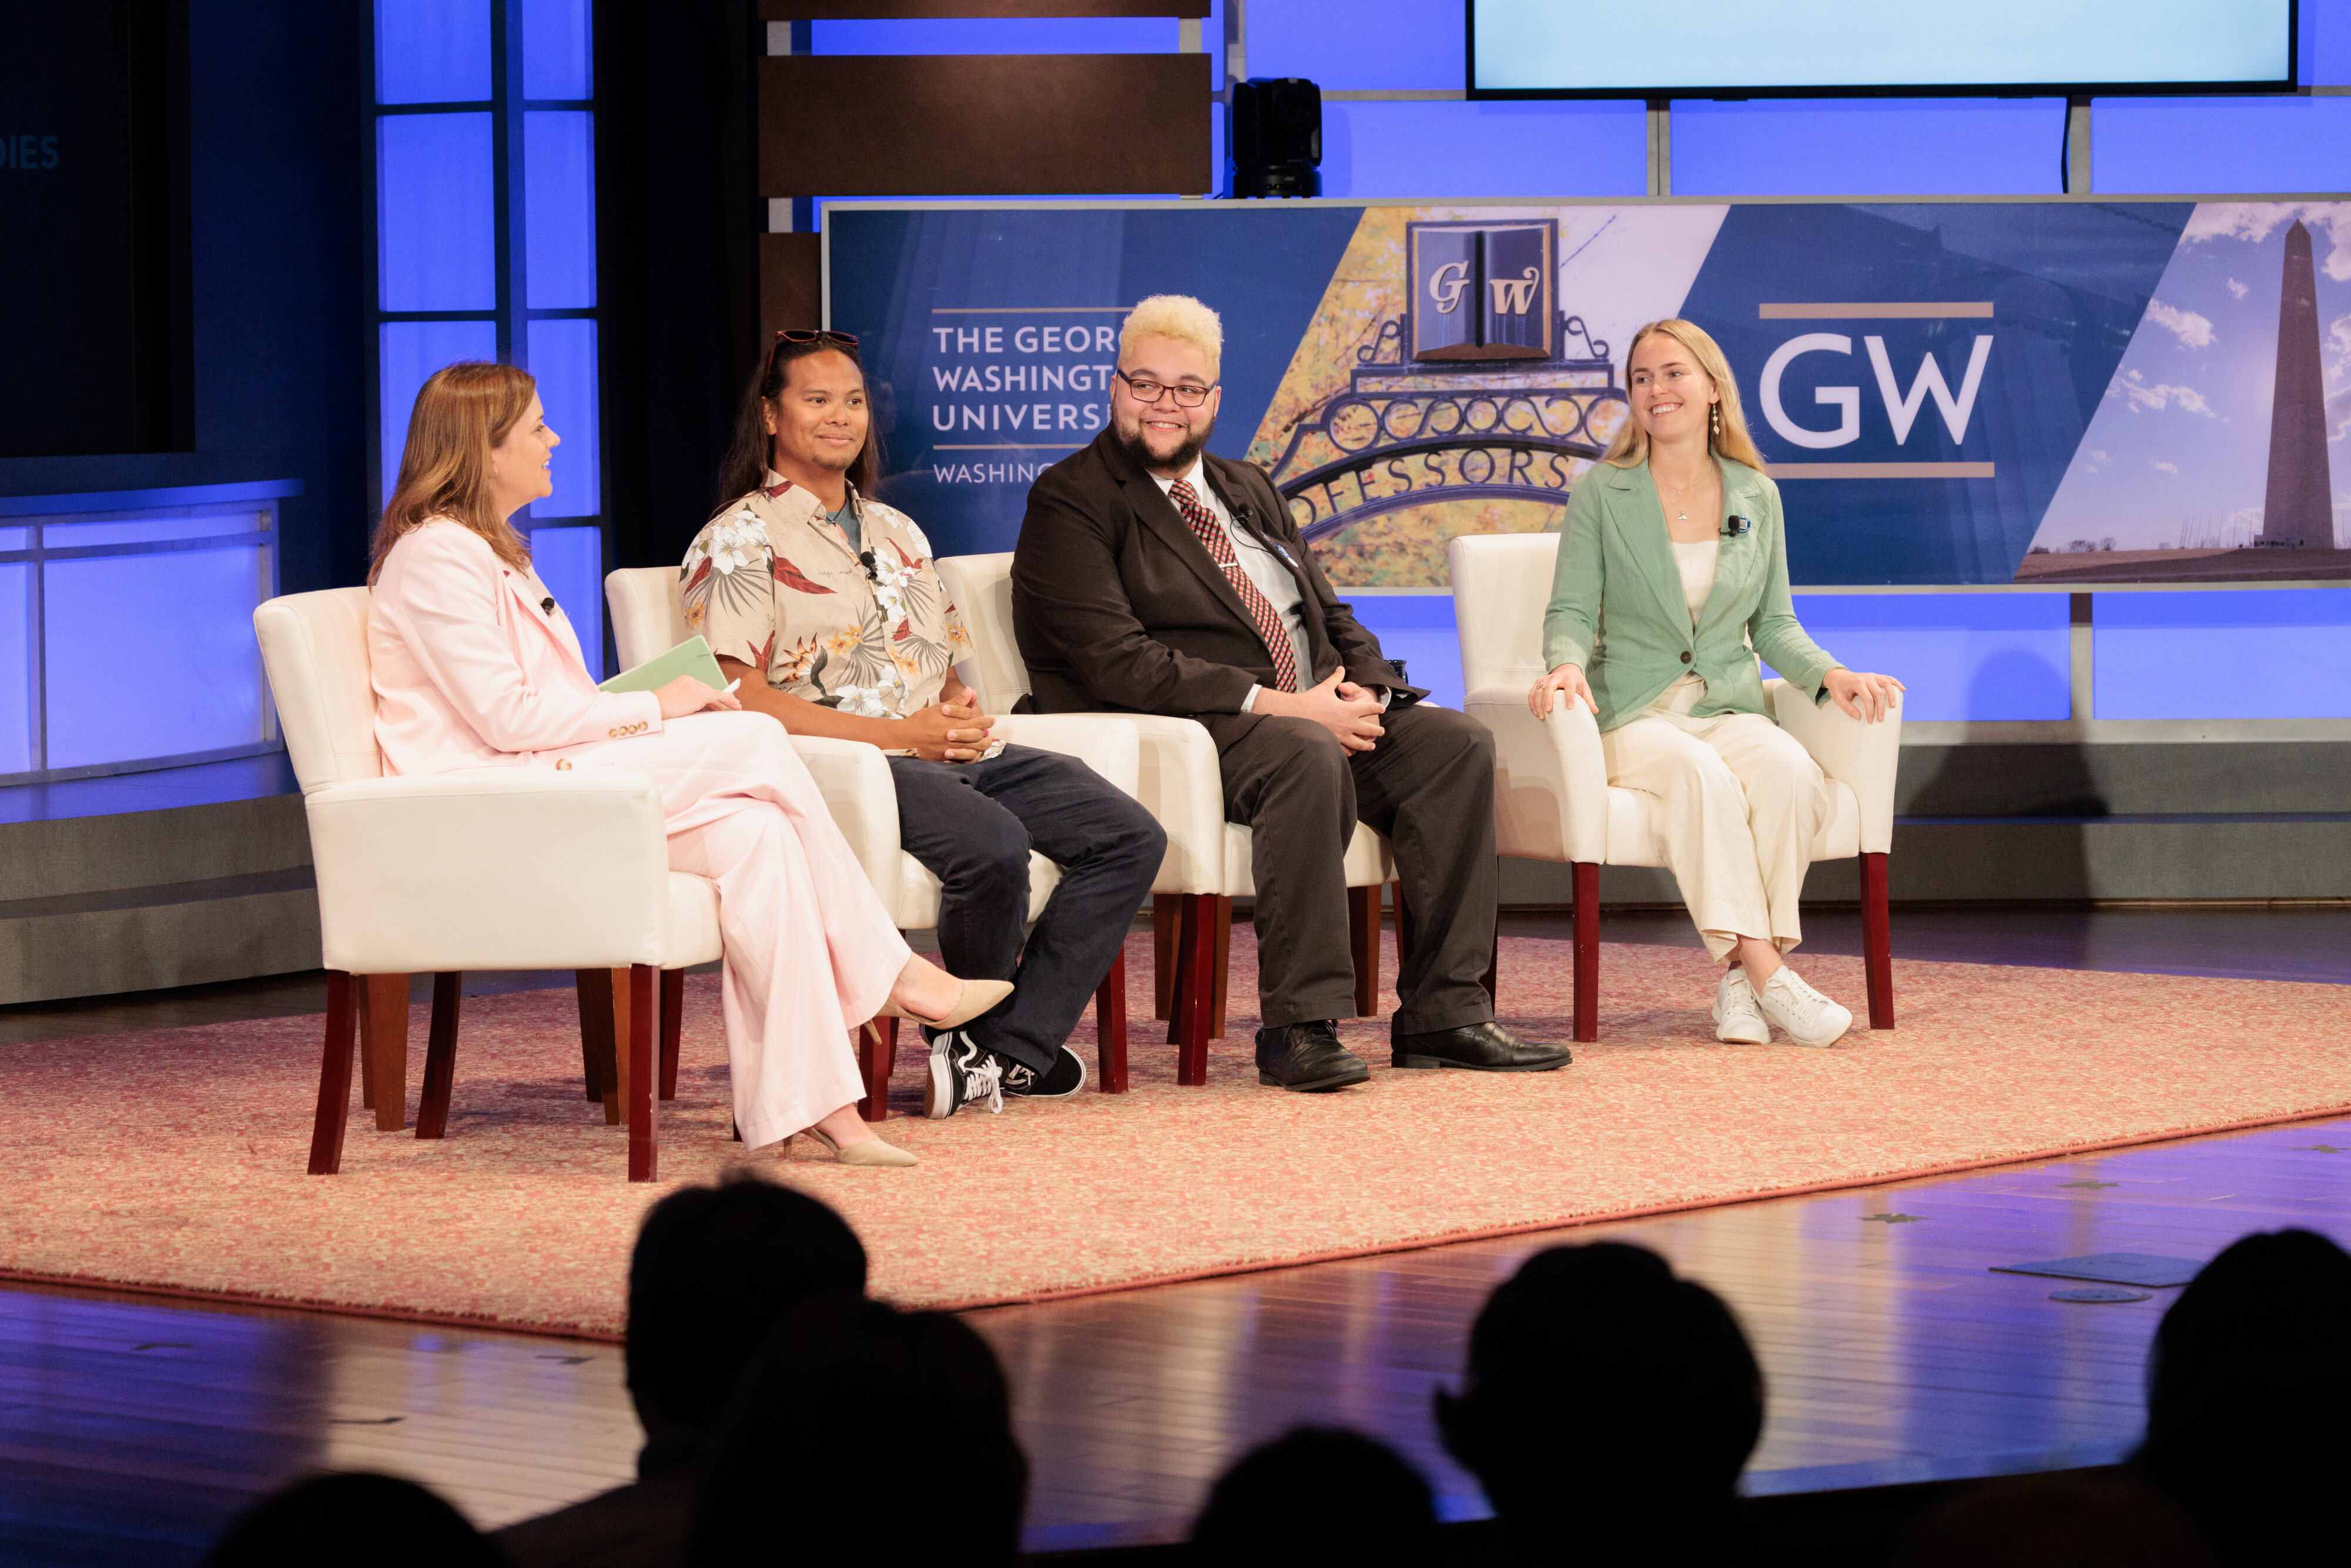 (From left to right) Kaitlyn Yarnall, Chief Storytelling Officer, National Geographic Society; Farron Taijeron, University of Guam; Owen Volk, SUNY-ESF; and Libby Mohn, Middlebury Institute of International Studies; discuss storytelling from the field.